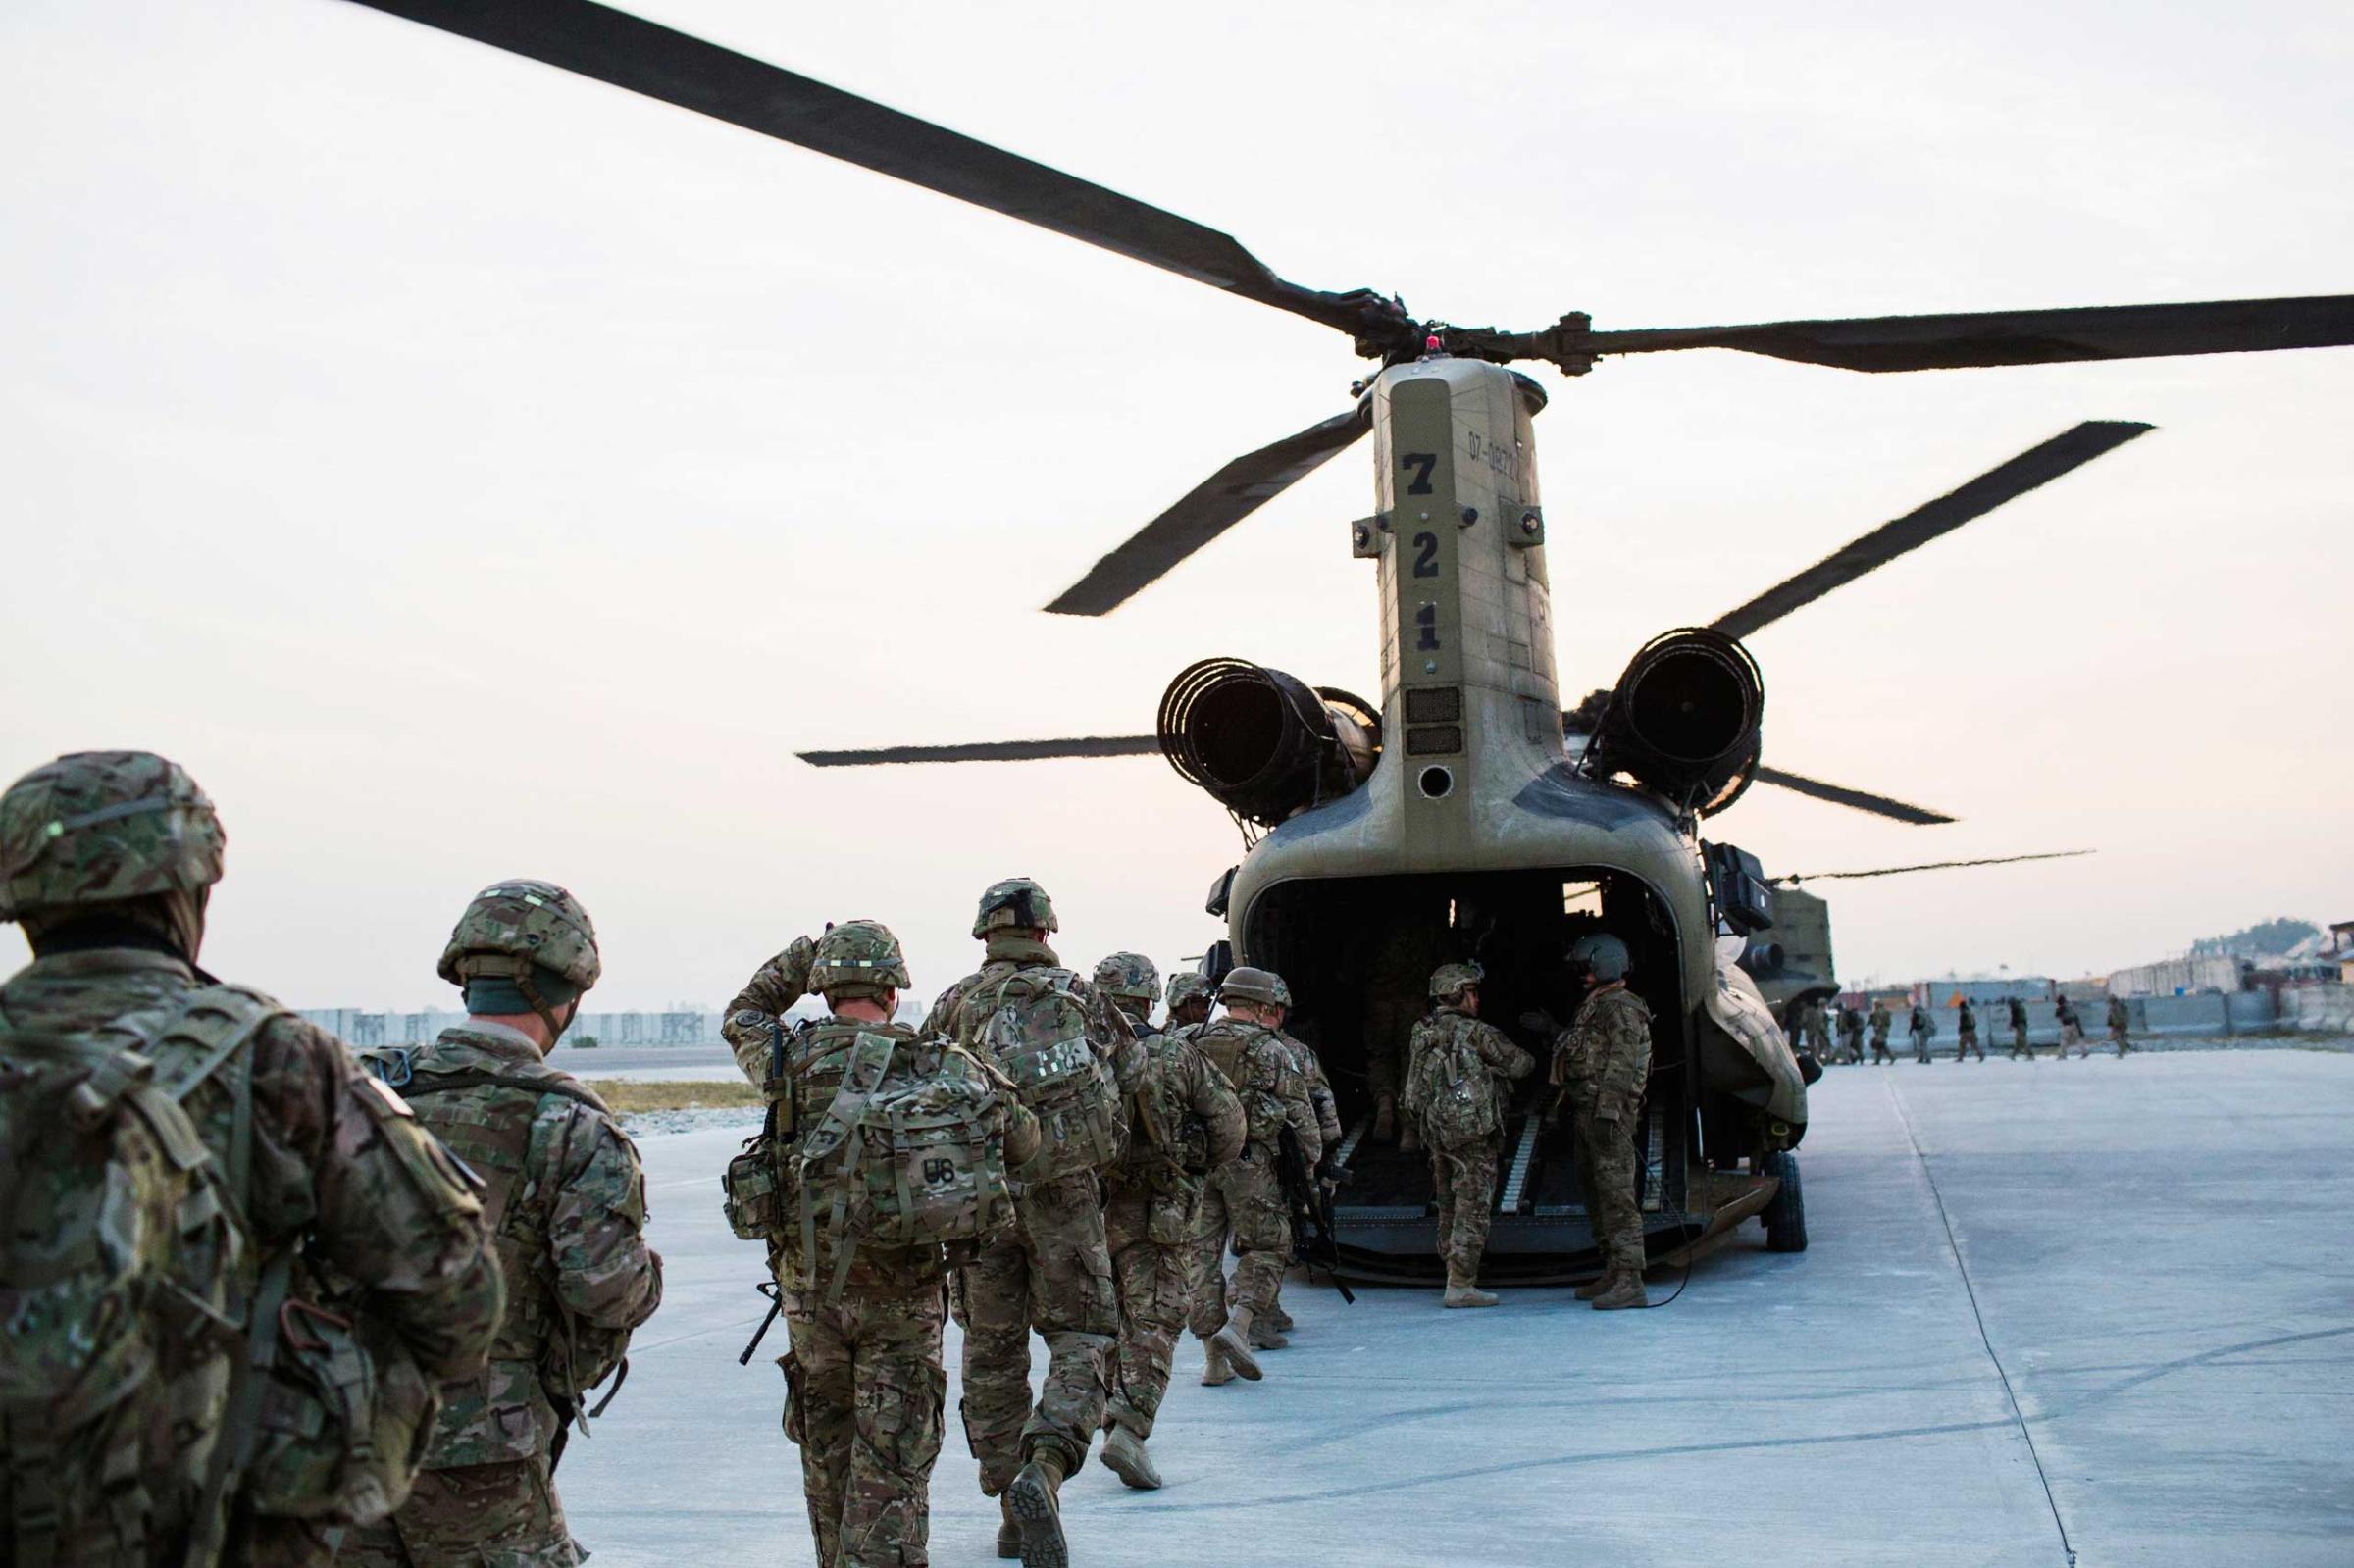 U.S. soldiers from the 3rd Cavalry Regiment load into a CH-47 Chinook helicopter for an advising mission to an Afghan National Army base at forward operating base Fenty in the Nangarhar province of Afghanistan